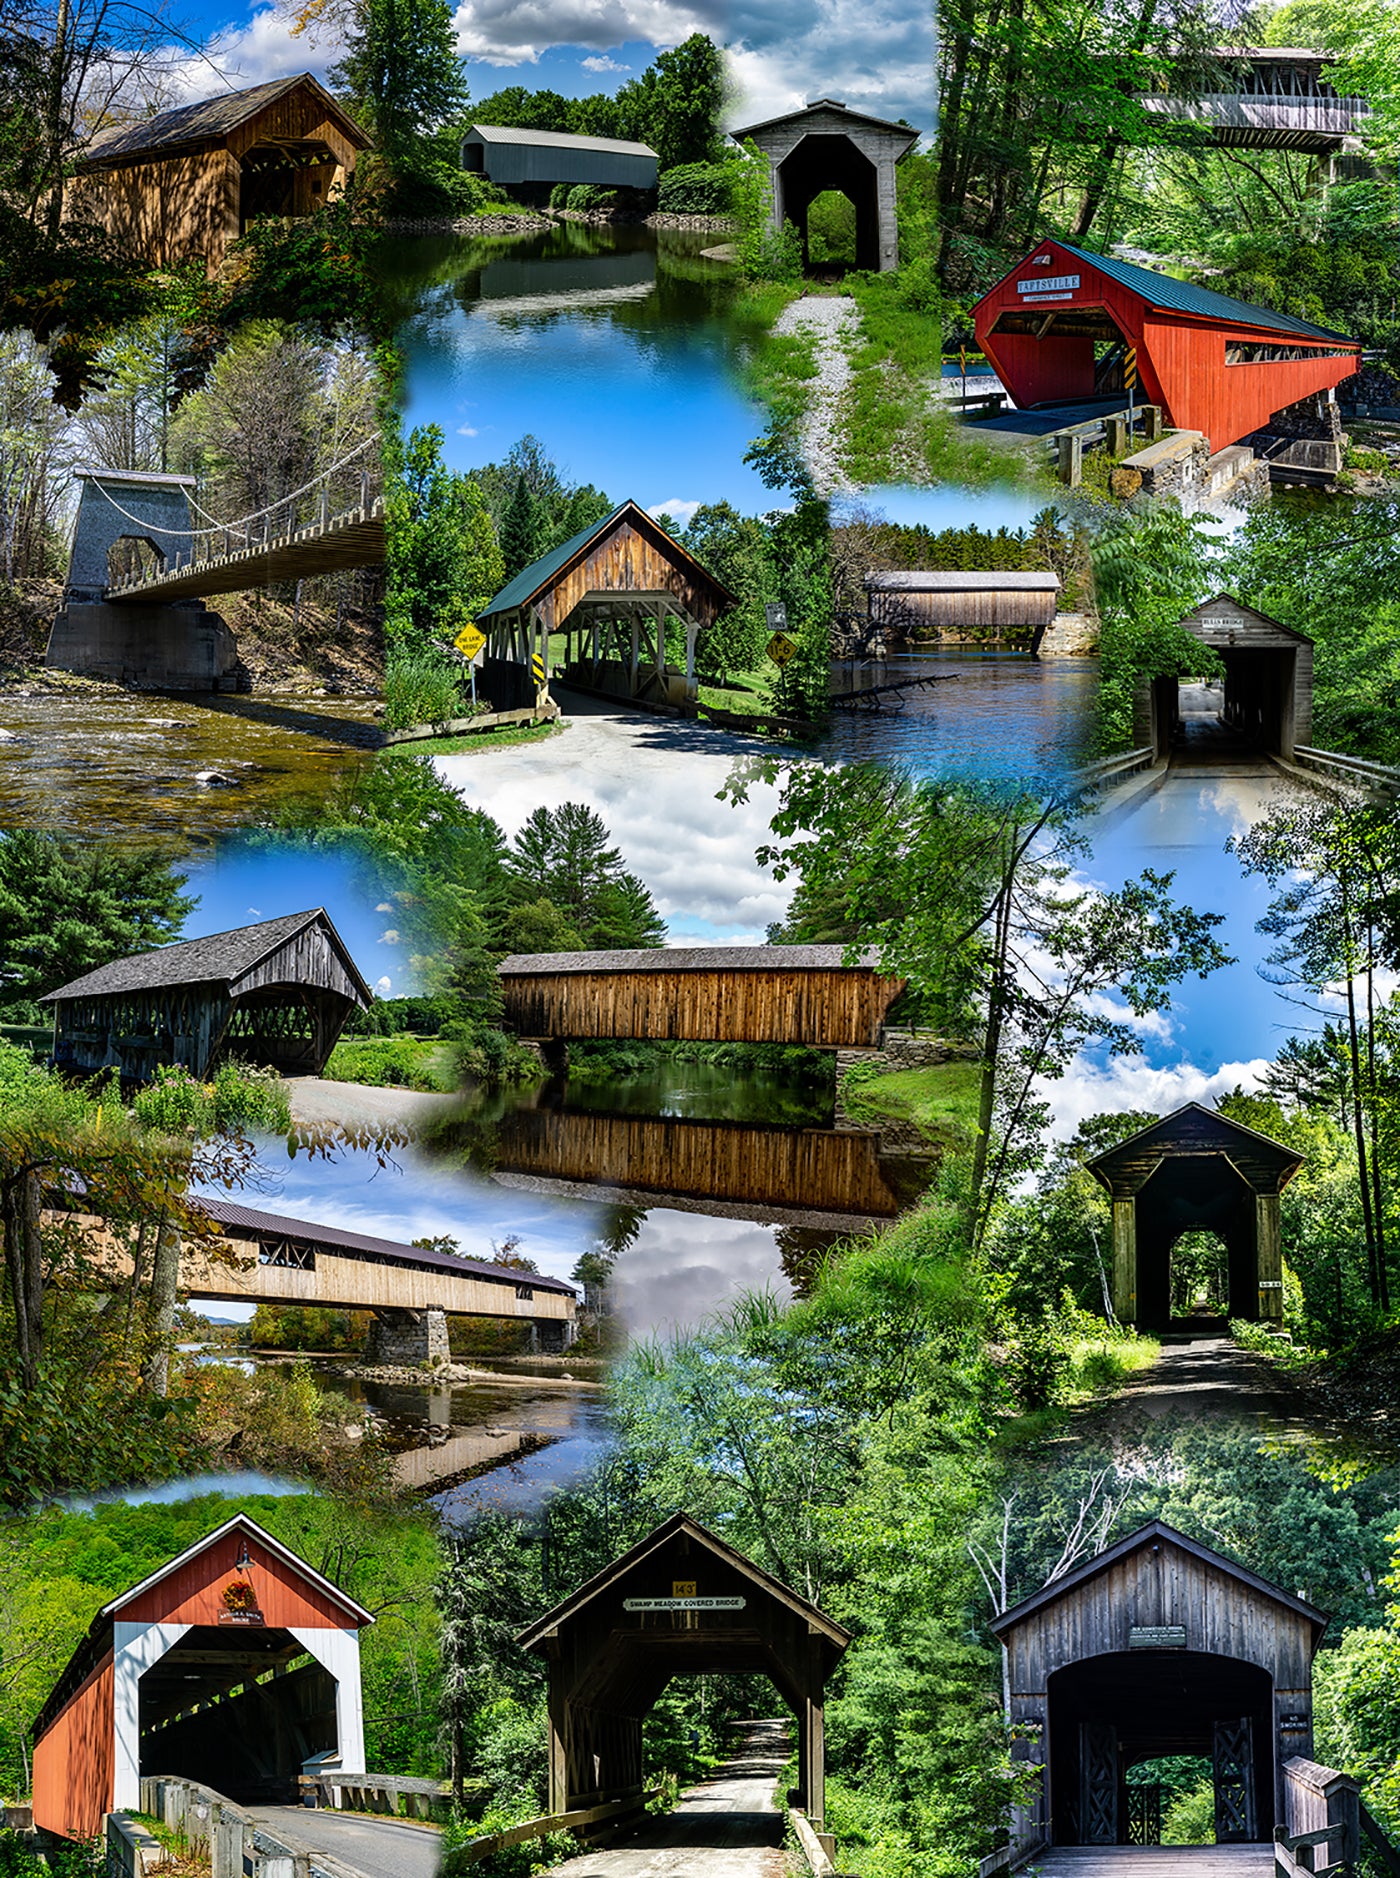 Covered Bridges of New England - 1000 Piece Jigsaw Puzzle